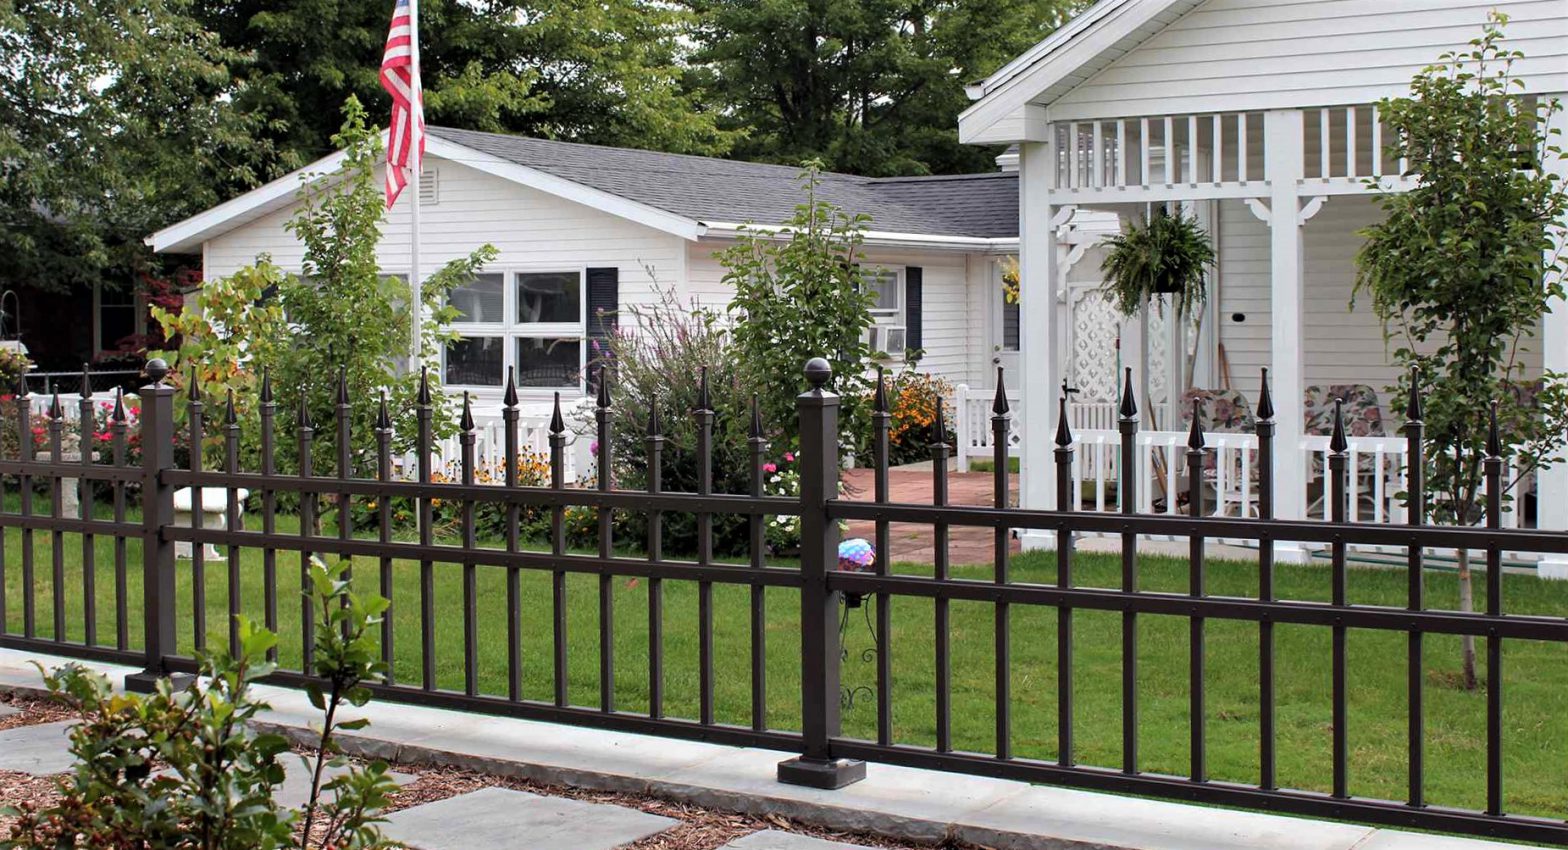 Photo of an aluminum fence in front of a residential home